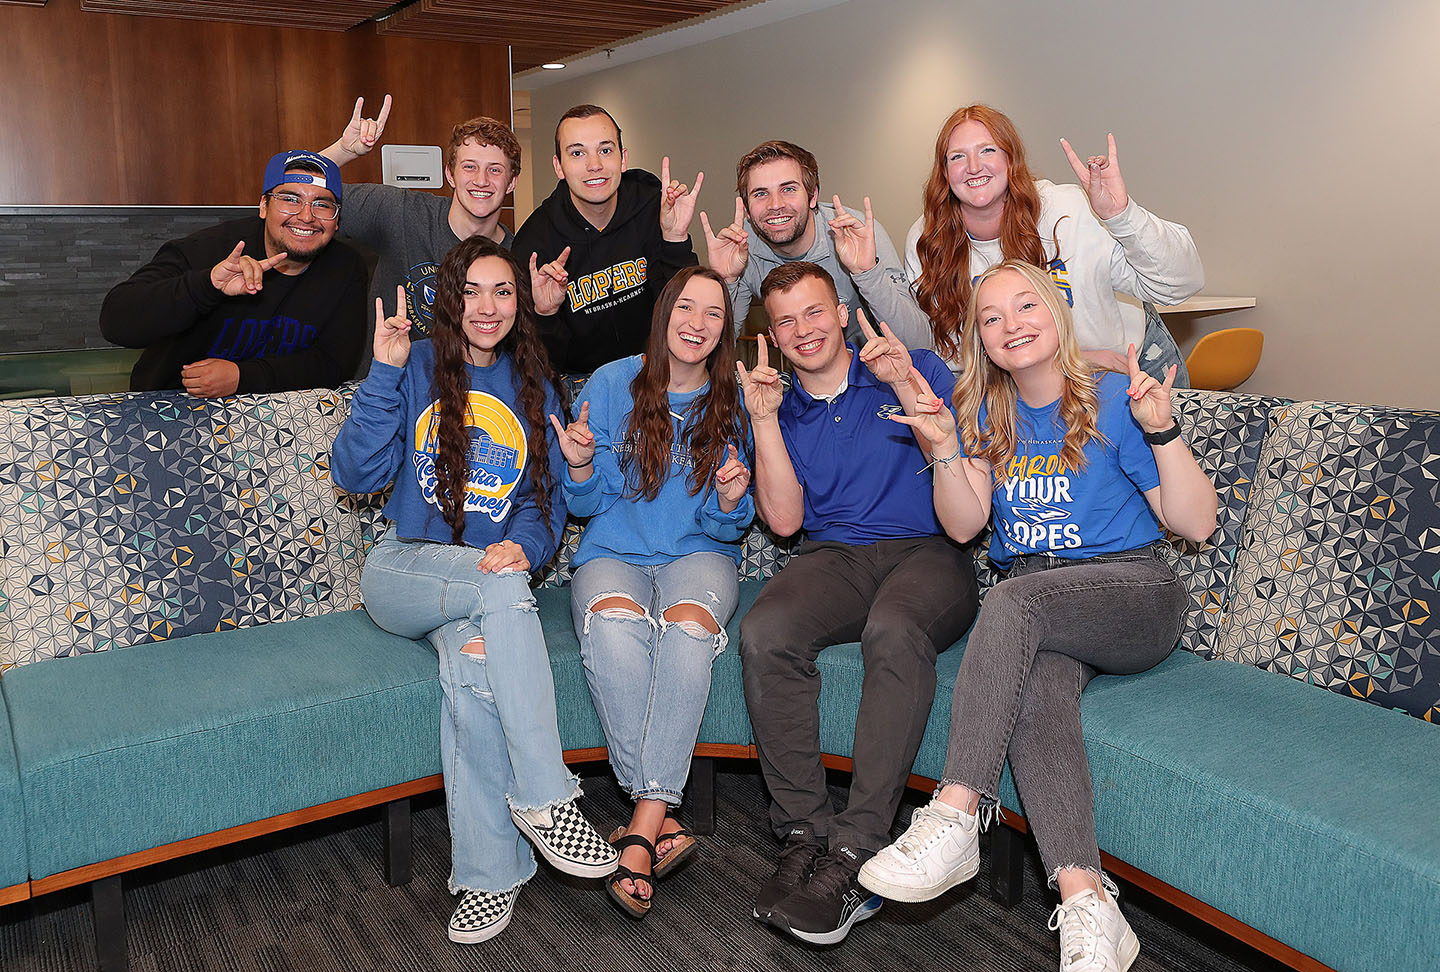 Aidan Weidner, back row second from right, is pictured last summer with the other New Student Enrollment leaders at UNK. (Photo by Erika Pritchard, UNK Communications)